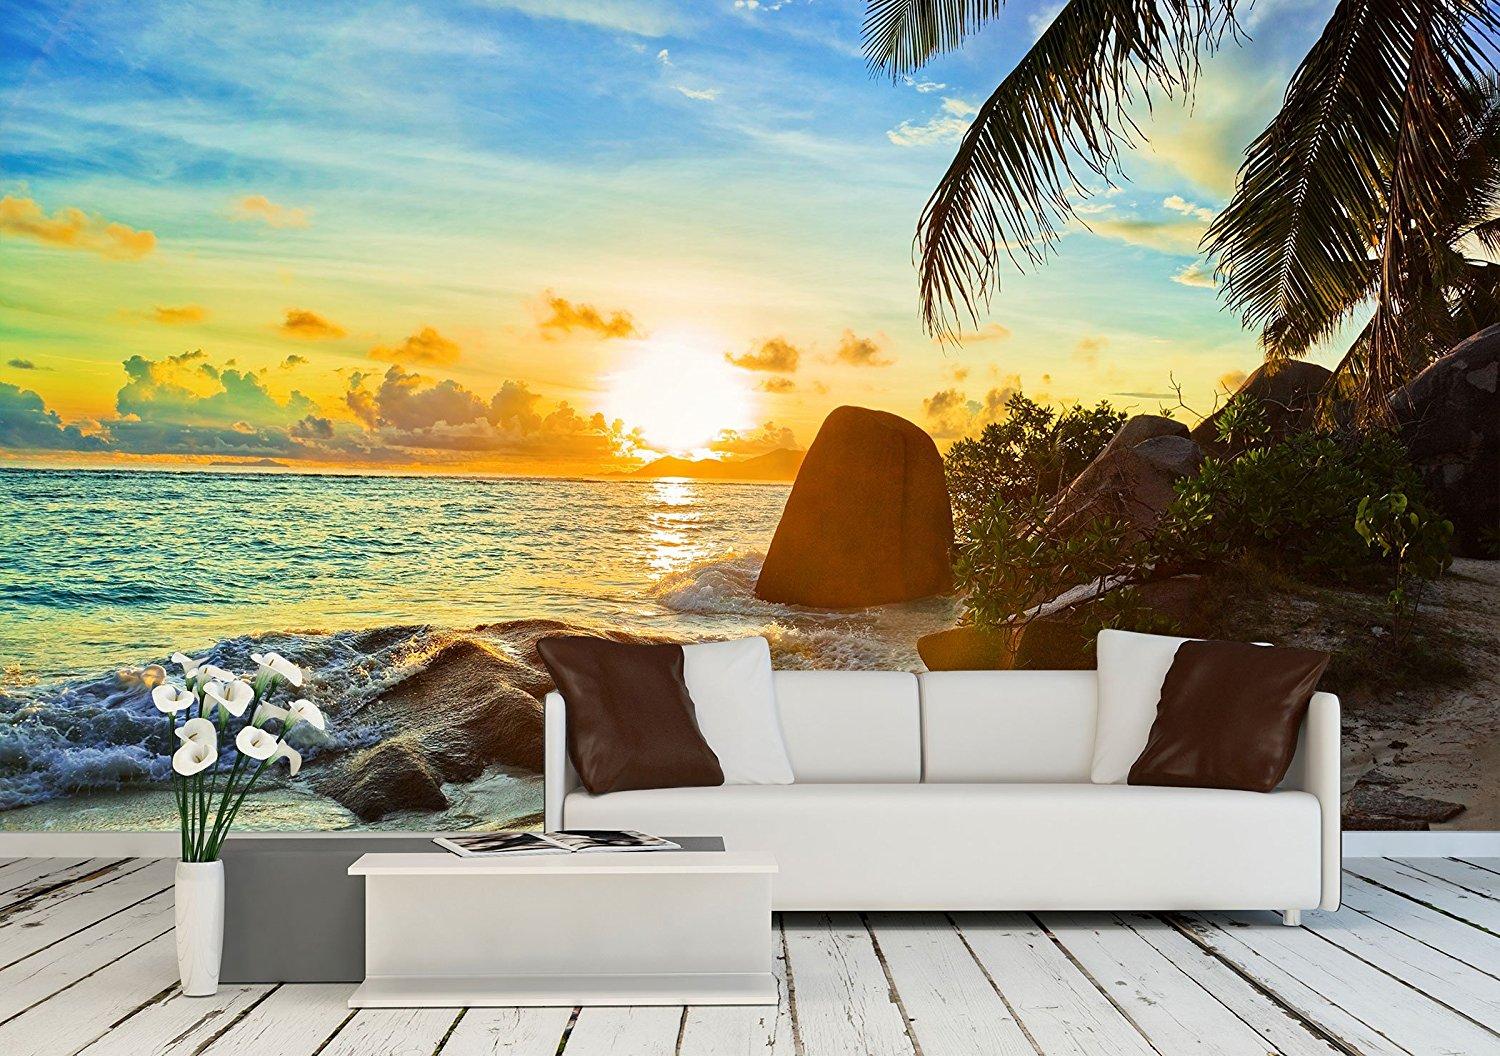 1500 x 1056 · jpeg - wall26 - Tropical beach at sunset - nature background - Removable Wall ...